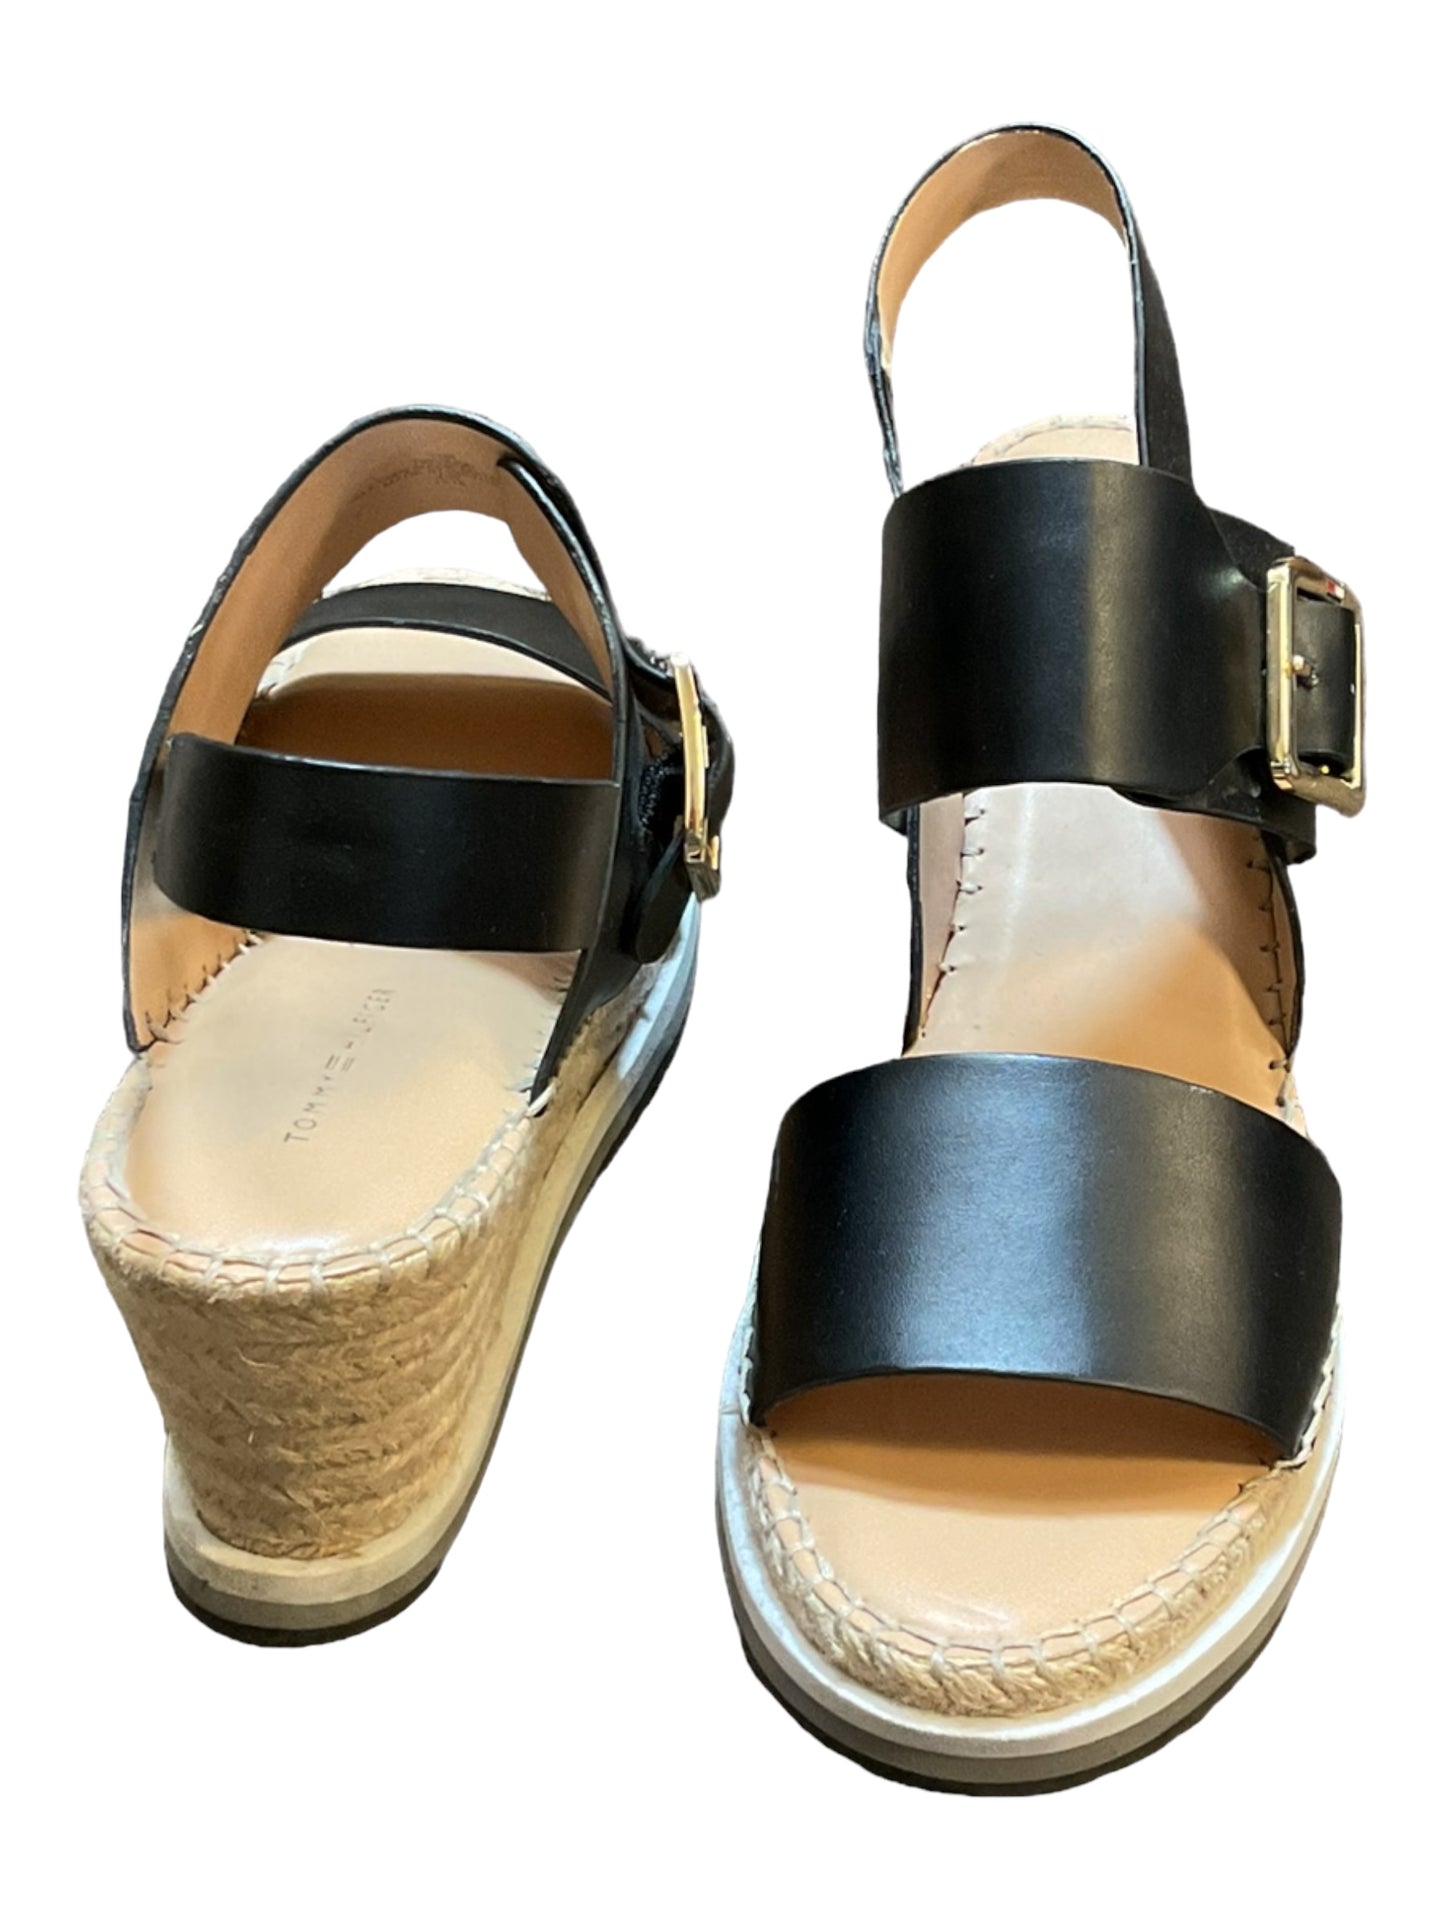 Sandals Heels Wedge By Tommy Hilfiger  Size: 11